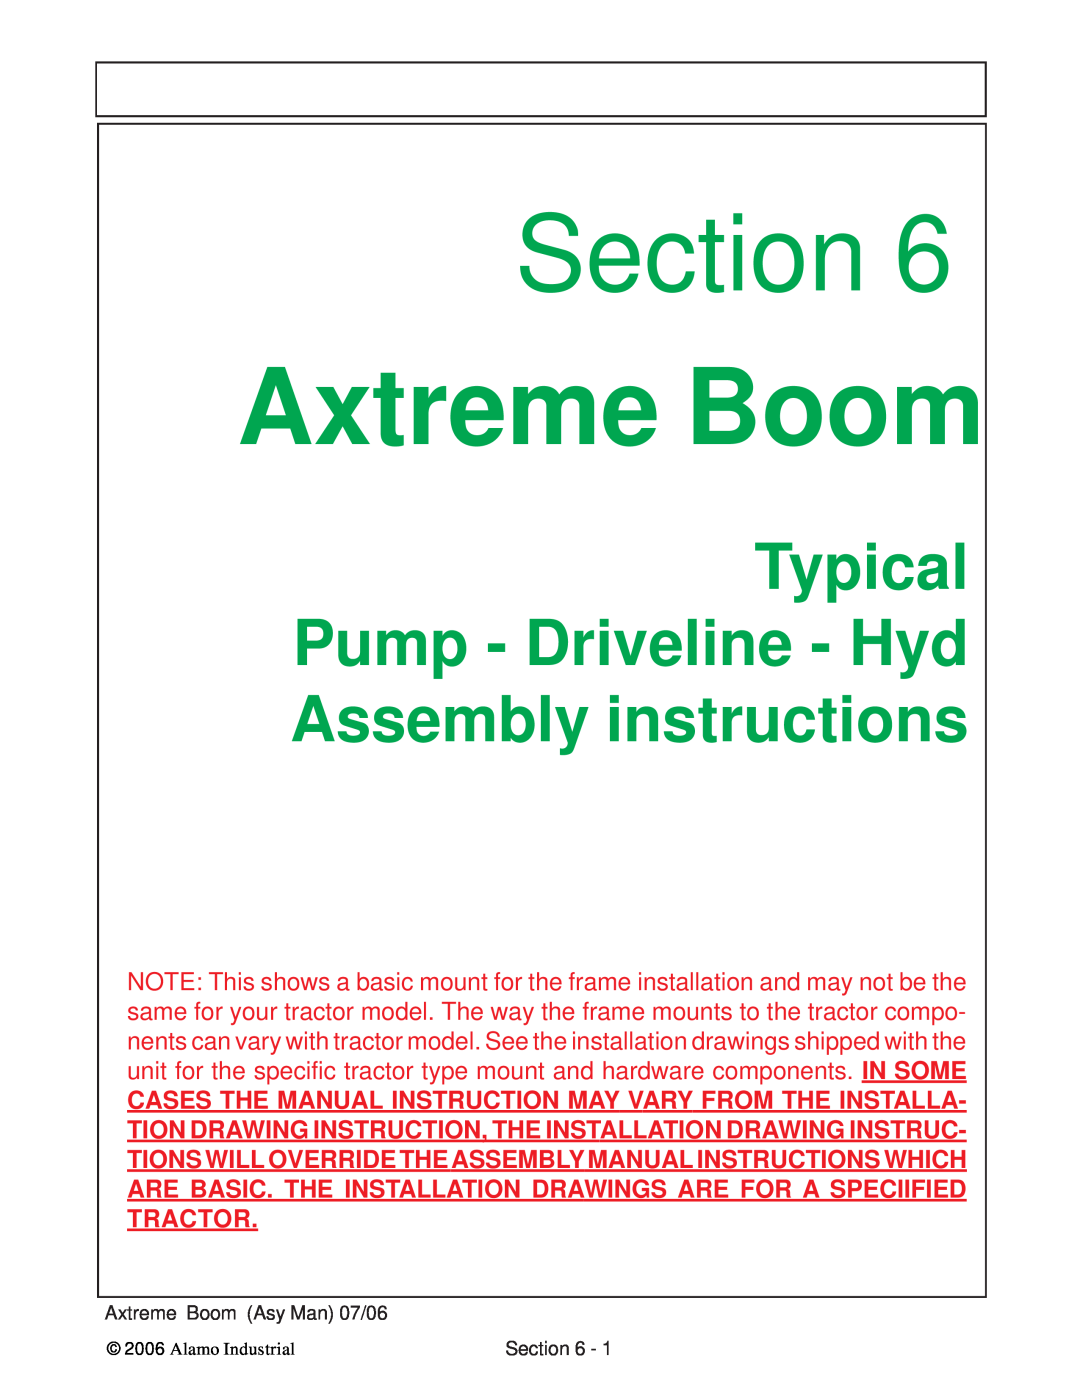 Alamo 02984405 Typical Pump - Driveline - Hyd Assembly instructions, Section, Axtreme Boom Asy Man 07/06 